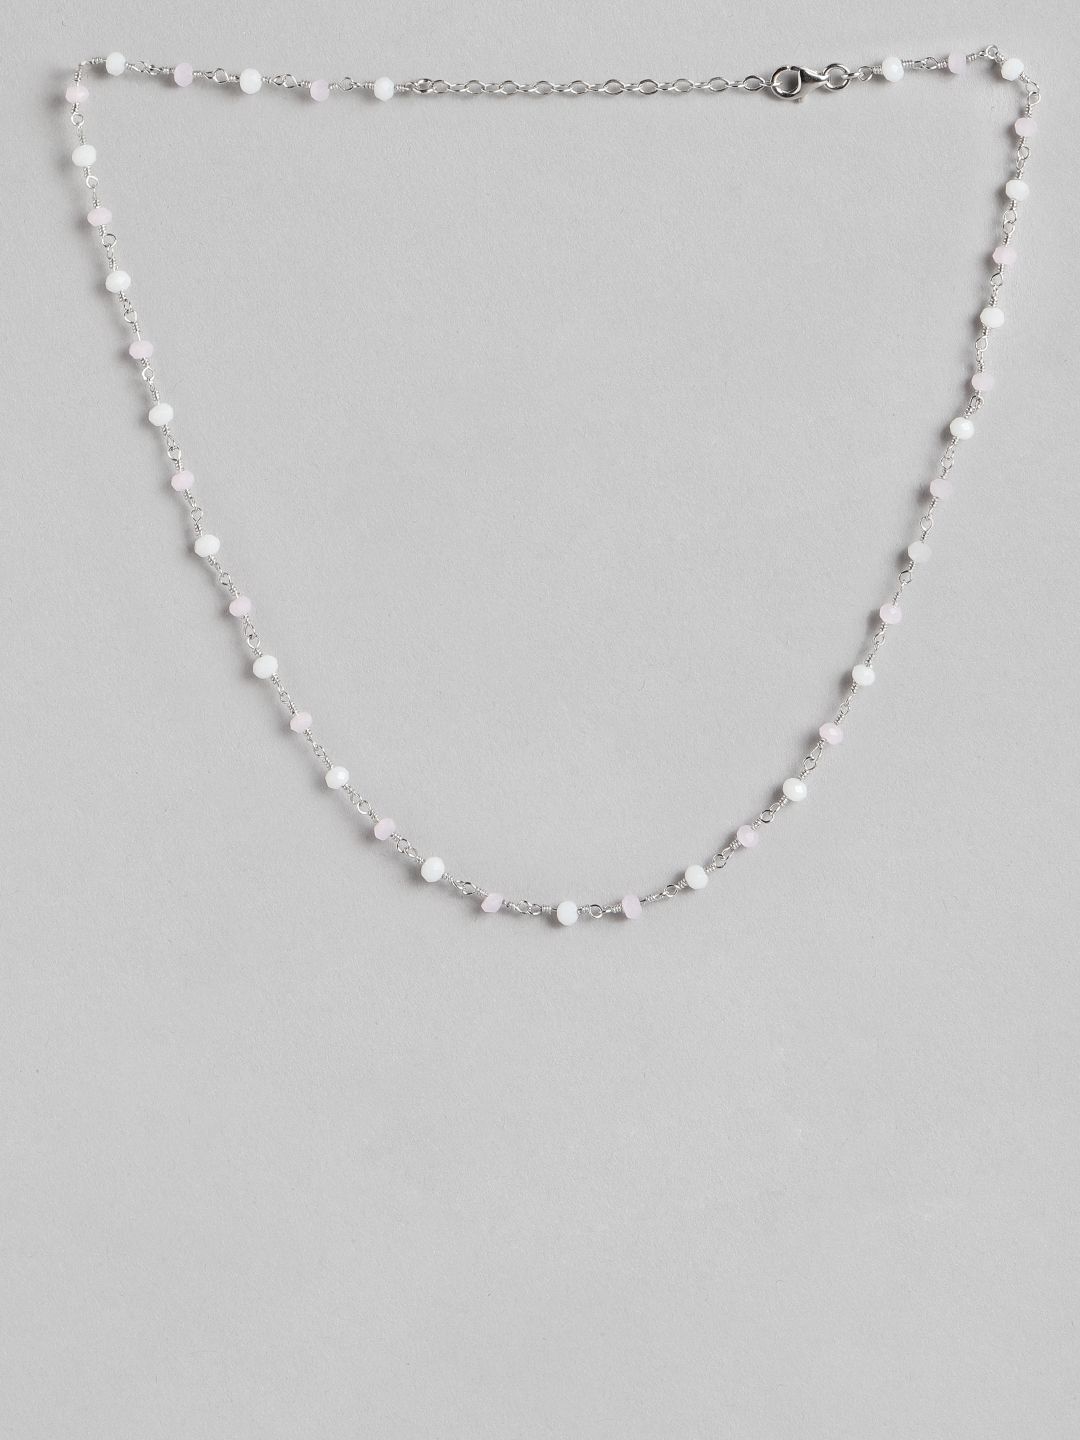 Carlton London Silver-Toned & White Brass Rhodium-Plated Necklace Price in India